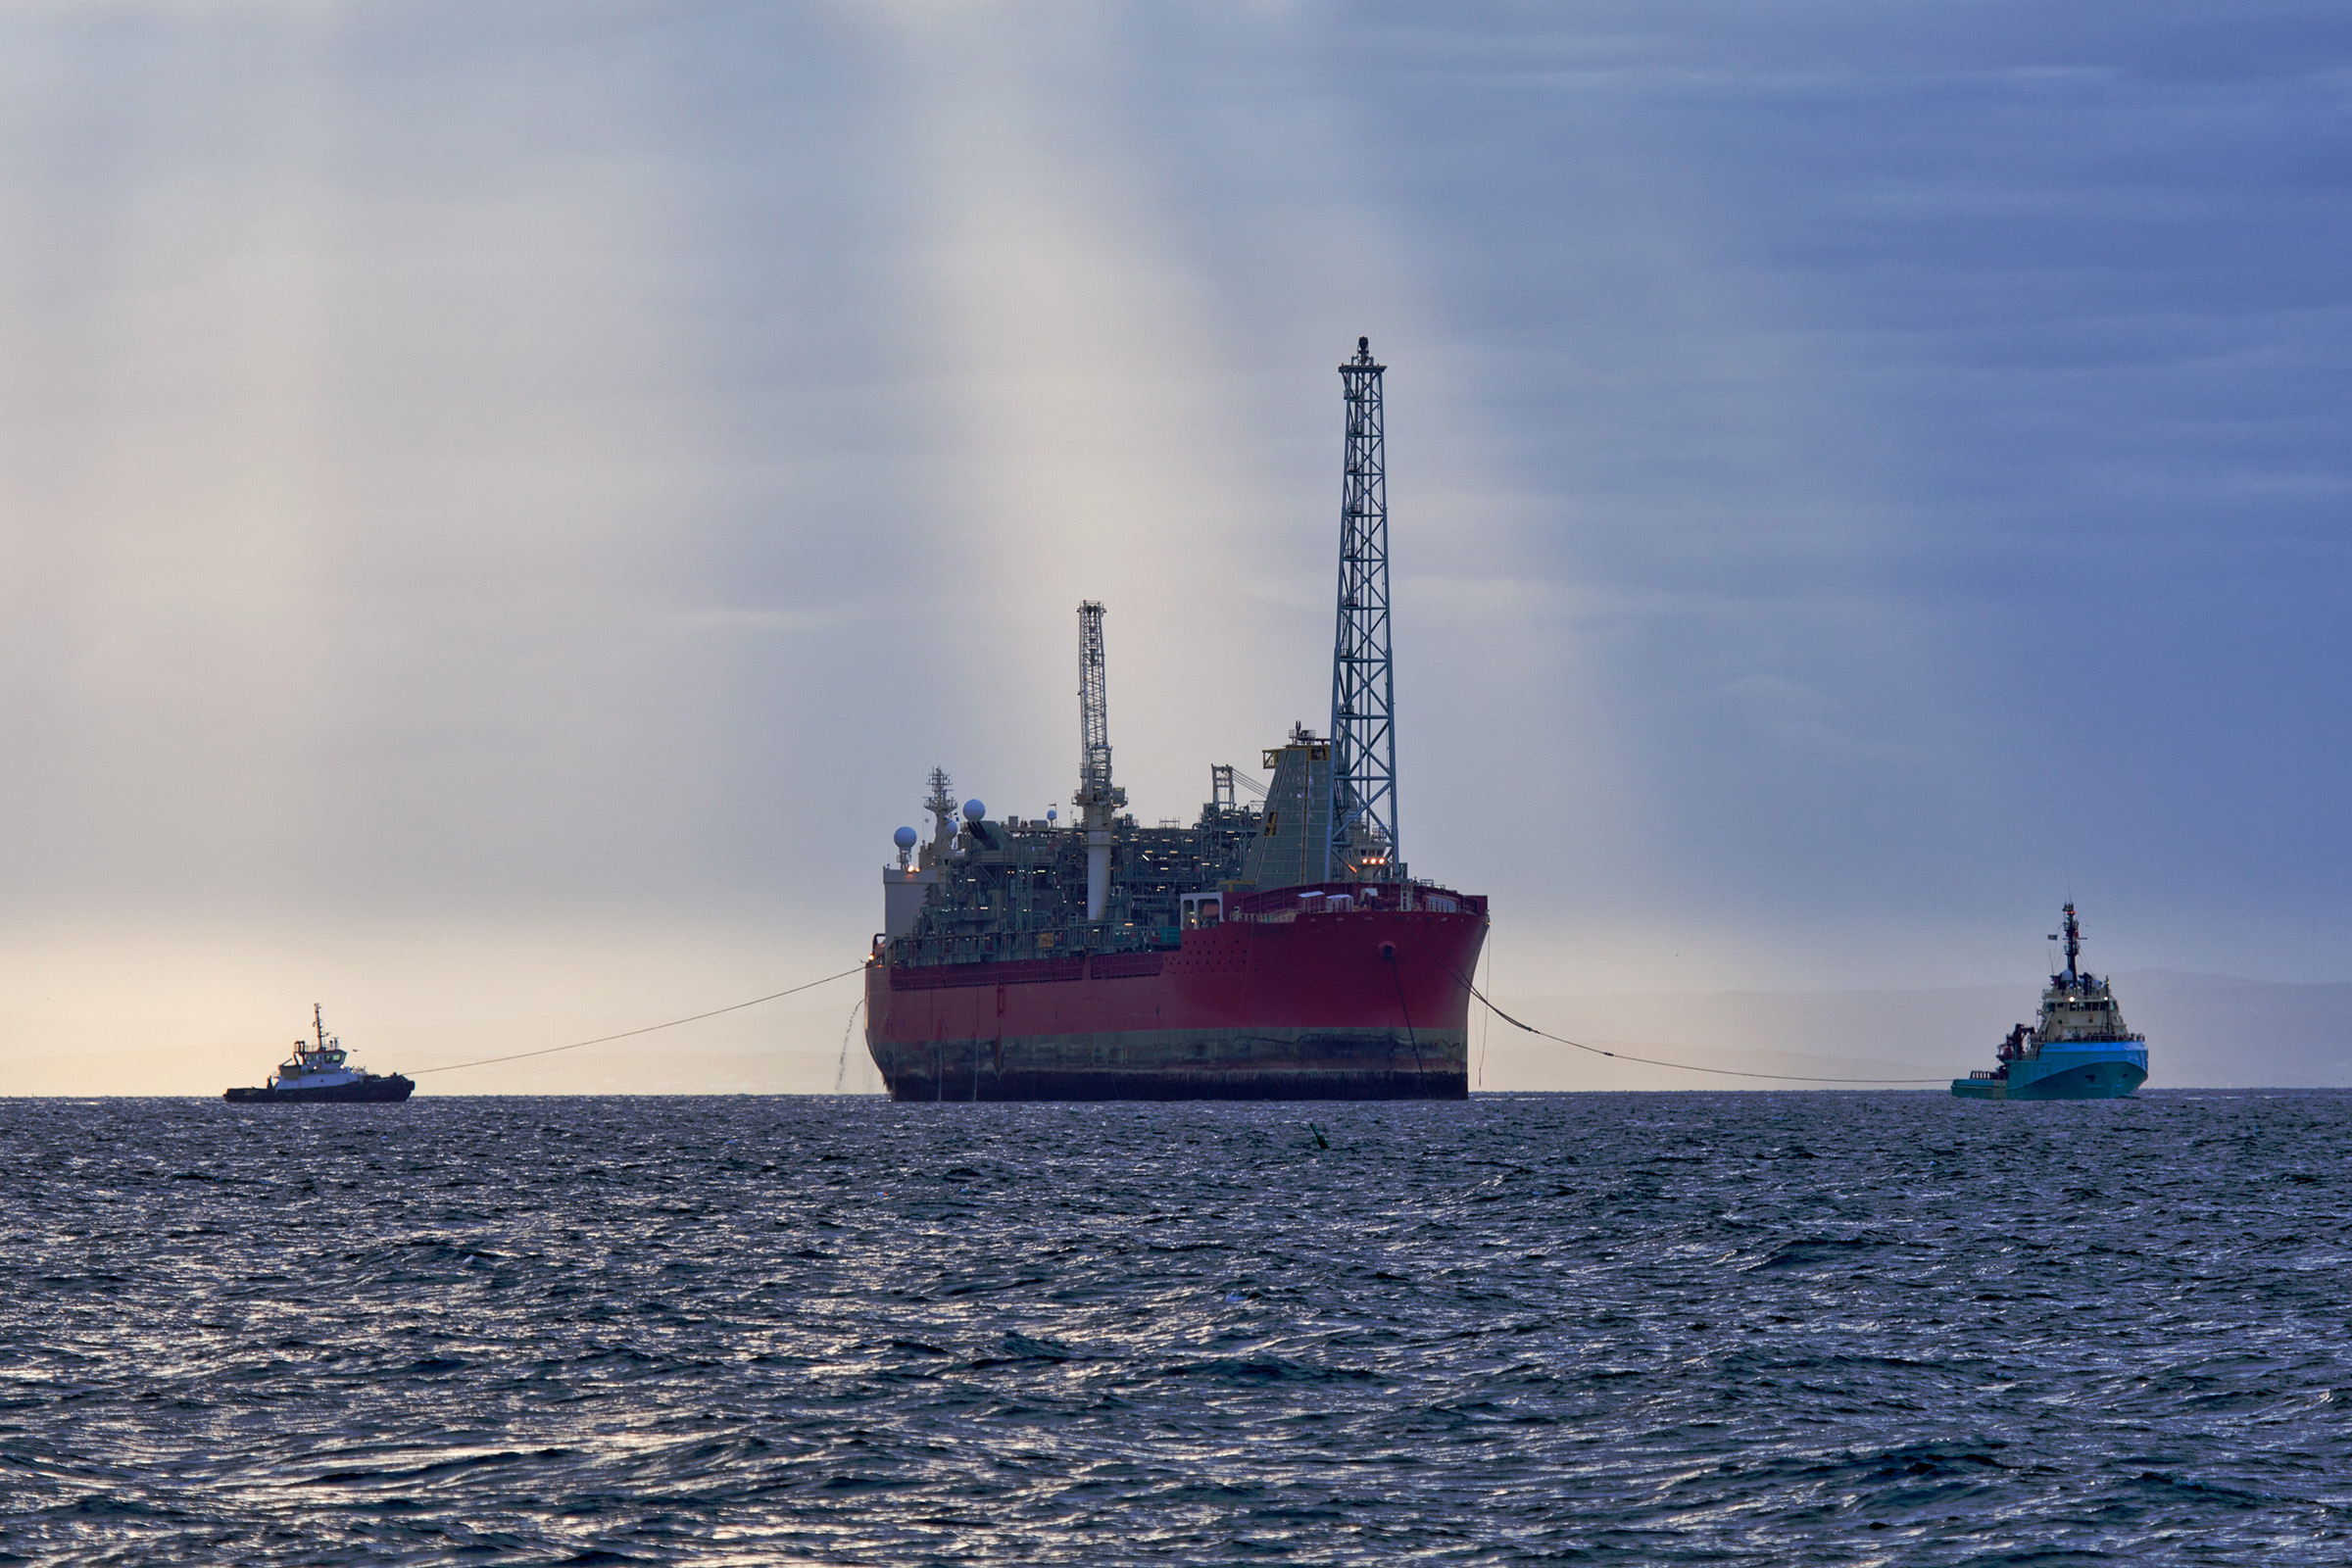 Oil and gas fpso at sunset photo